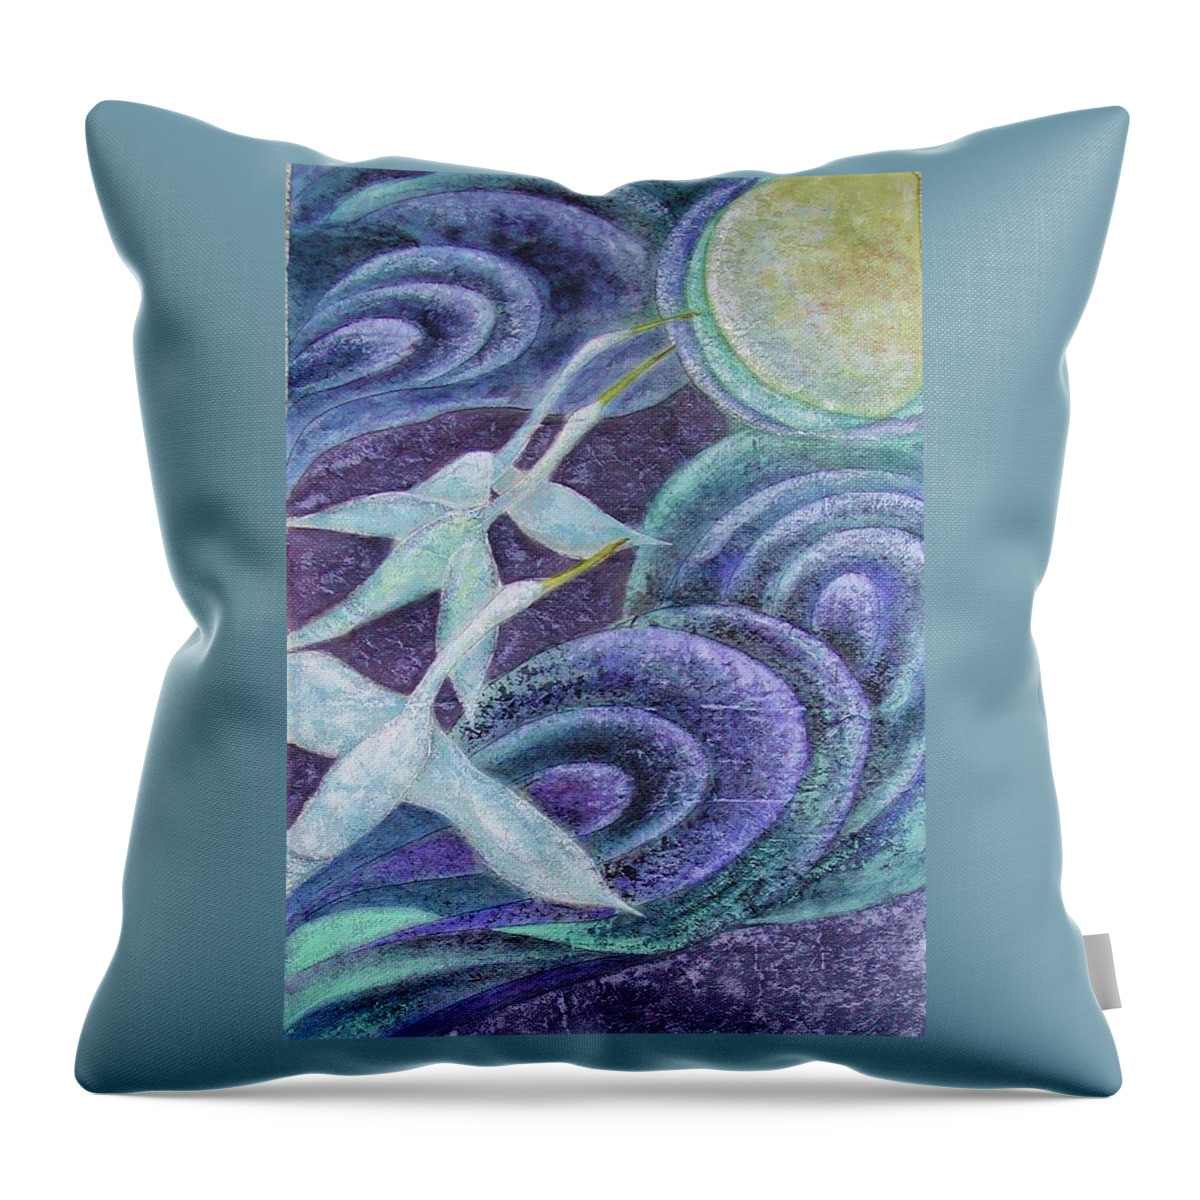 Cranes Throw Pillow featuring the painting Moon Birds by Vina Yang